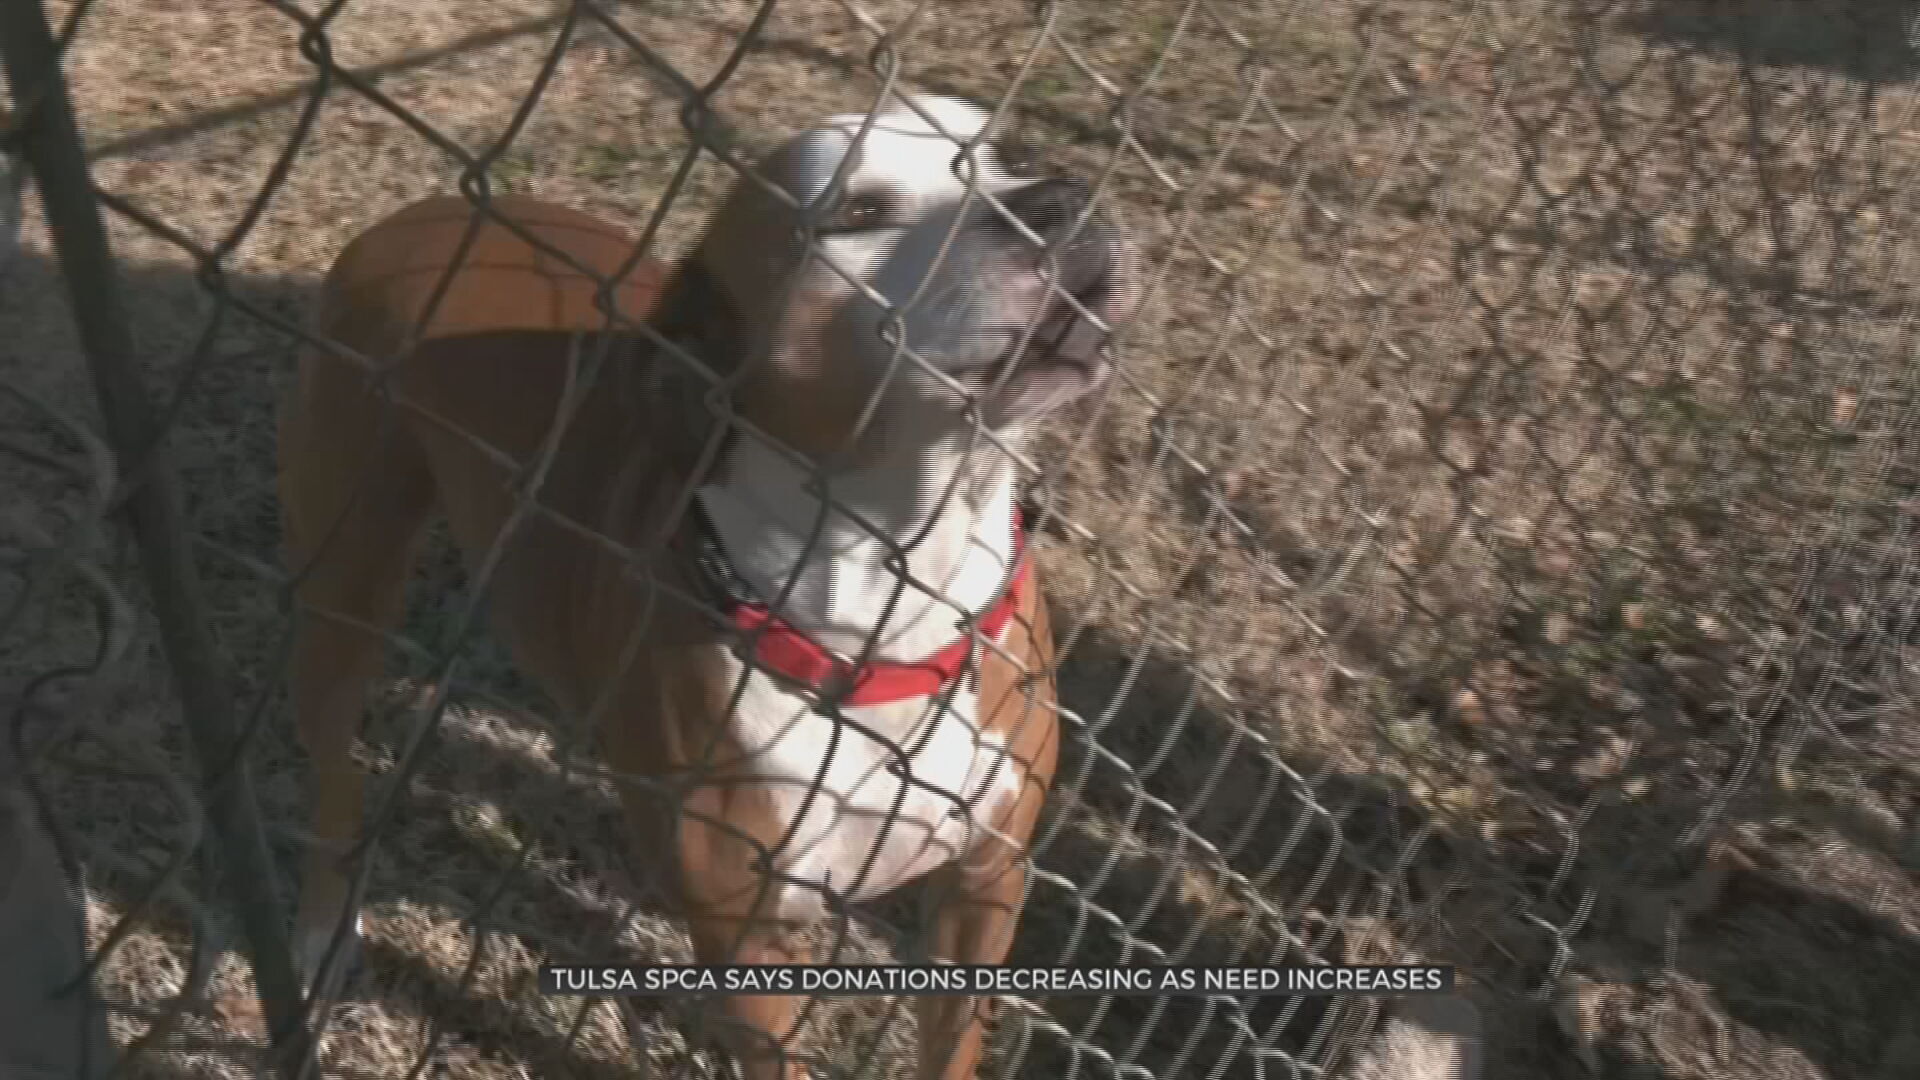 Tulsa SPCA Desperately Calls For Help As Donations Decline, Needs Increase 